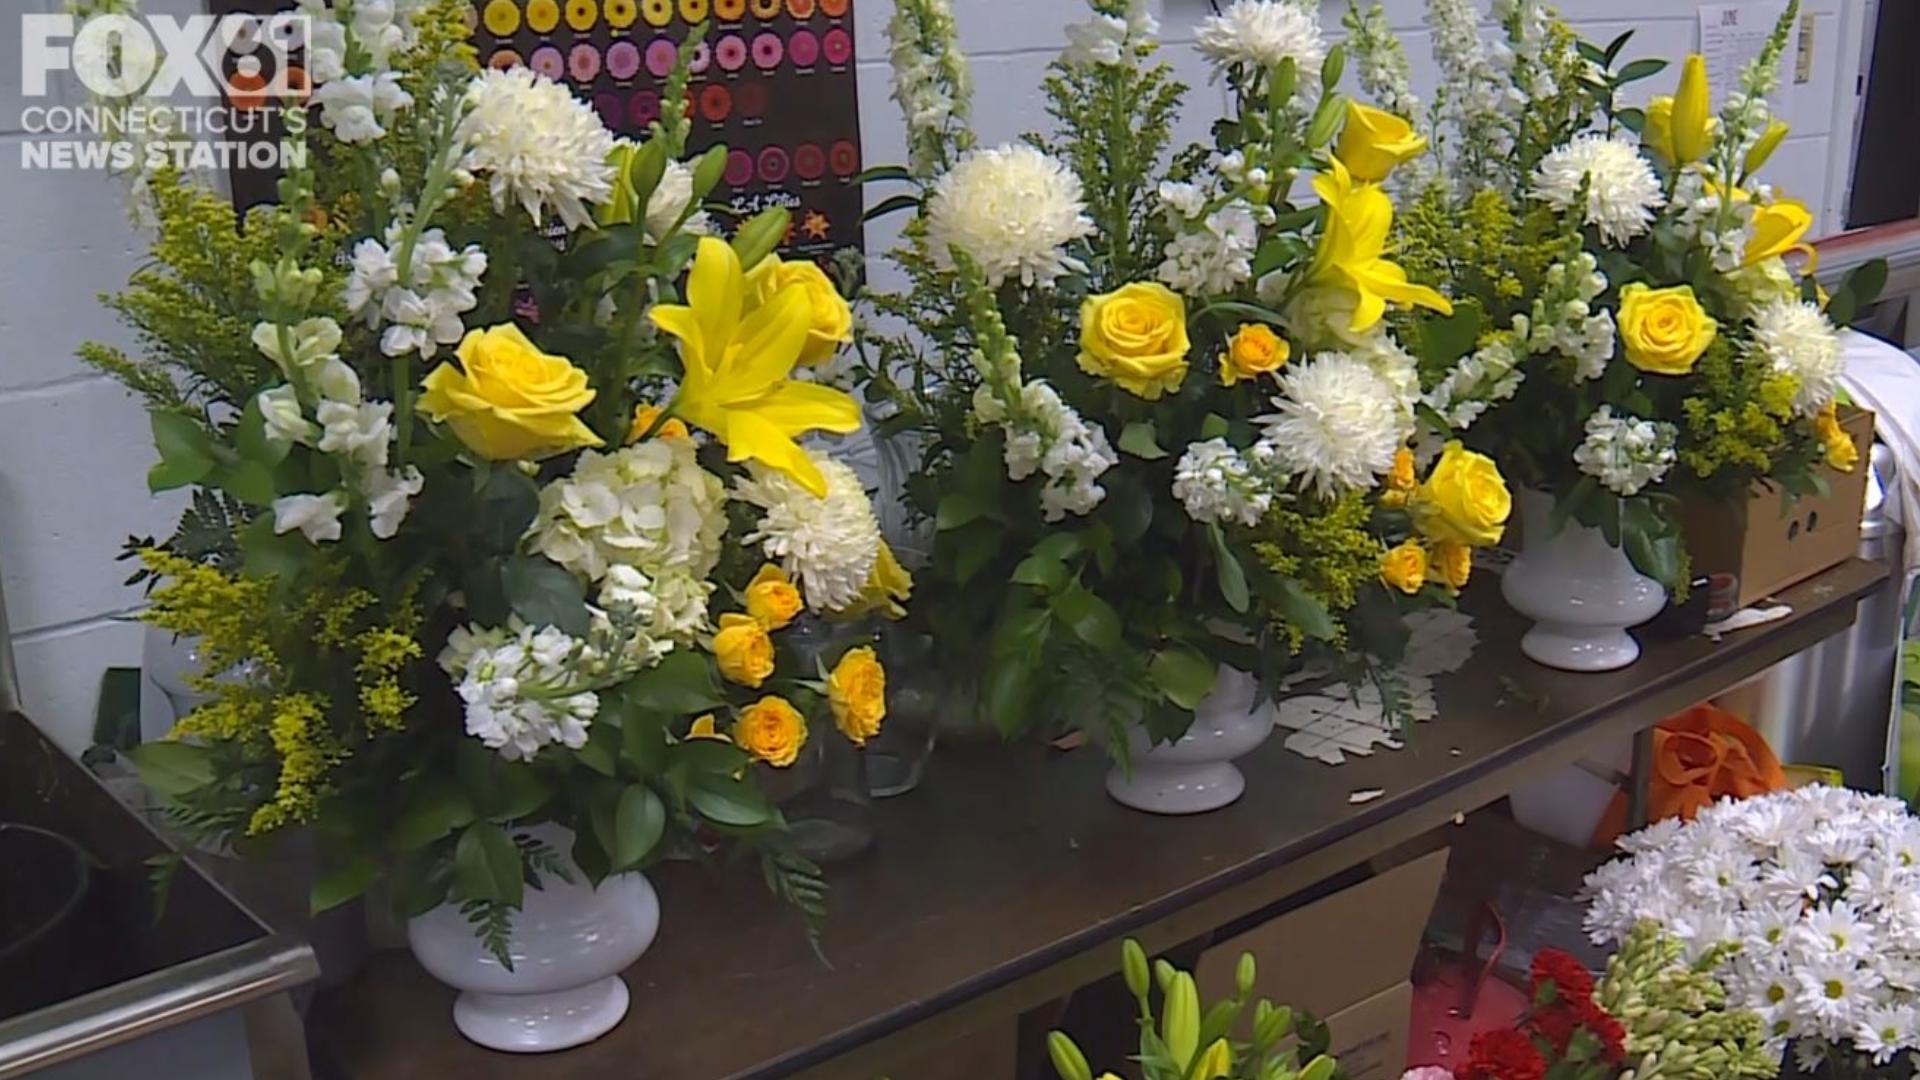 FOX61's Keith McGilvery visits Persimmon Petals at the YWCA. The proceeds go back into the programs that serve women, girls and families in Connecticut.